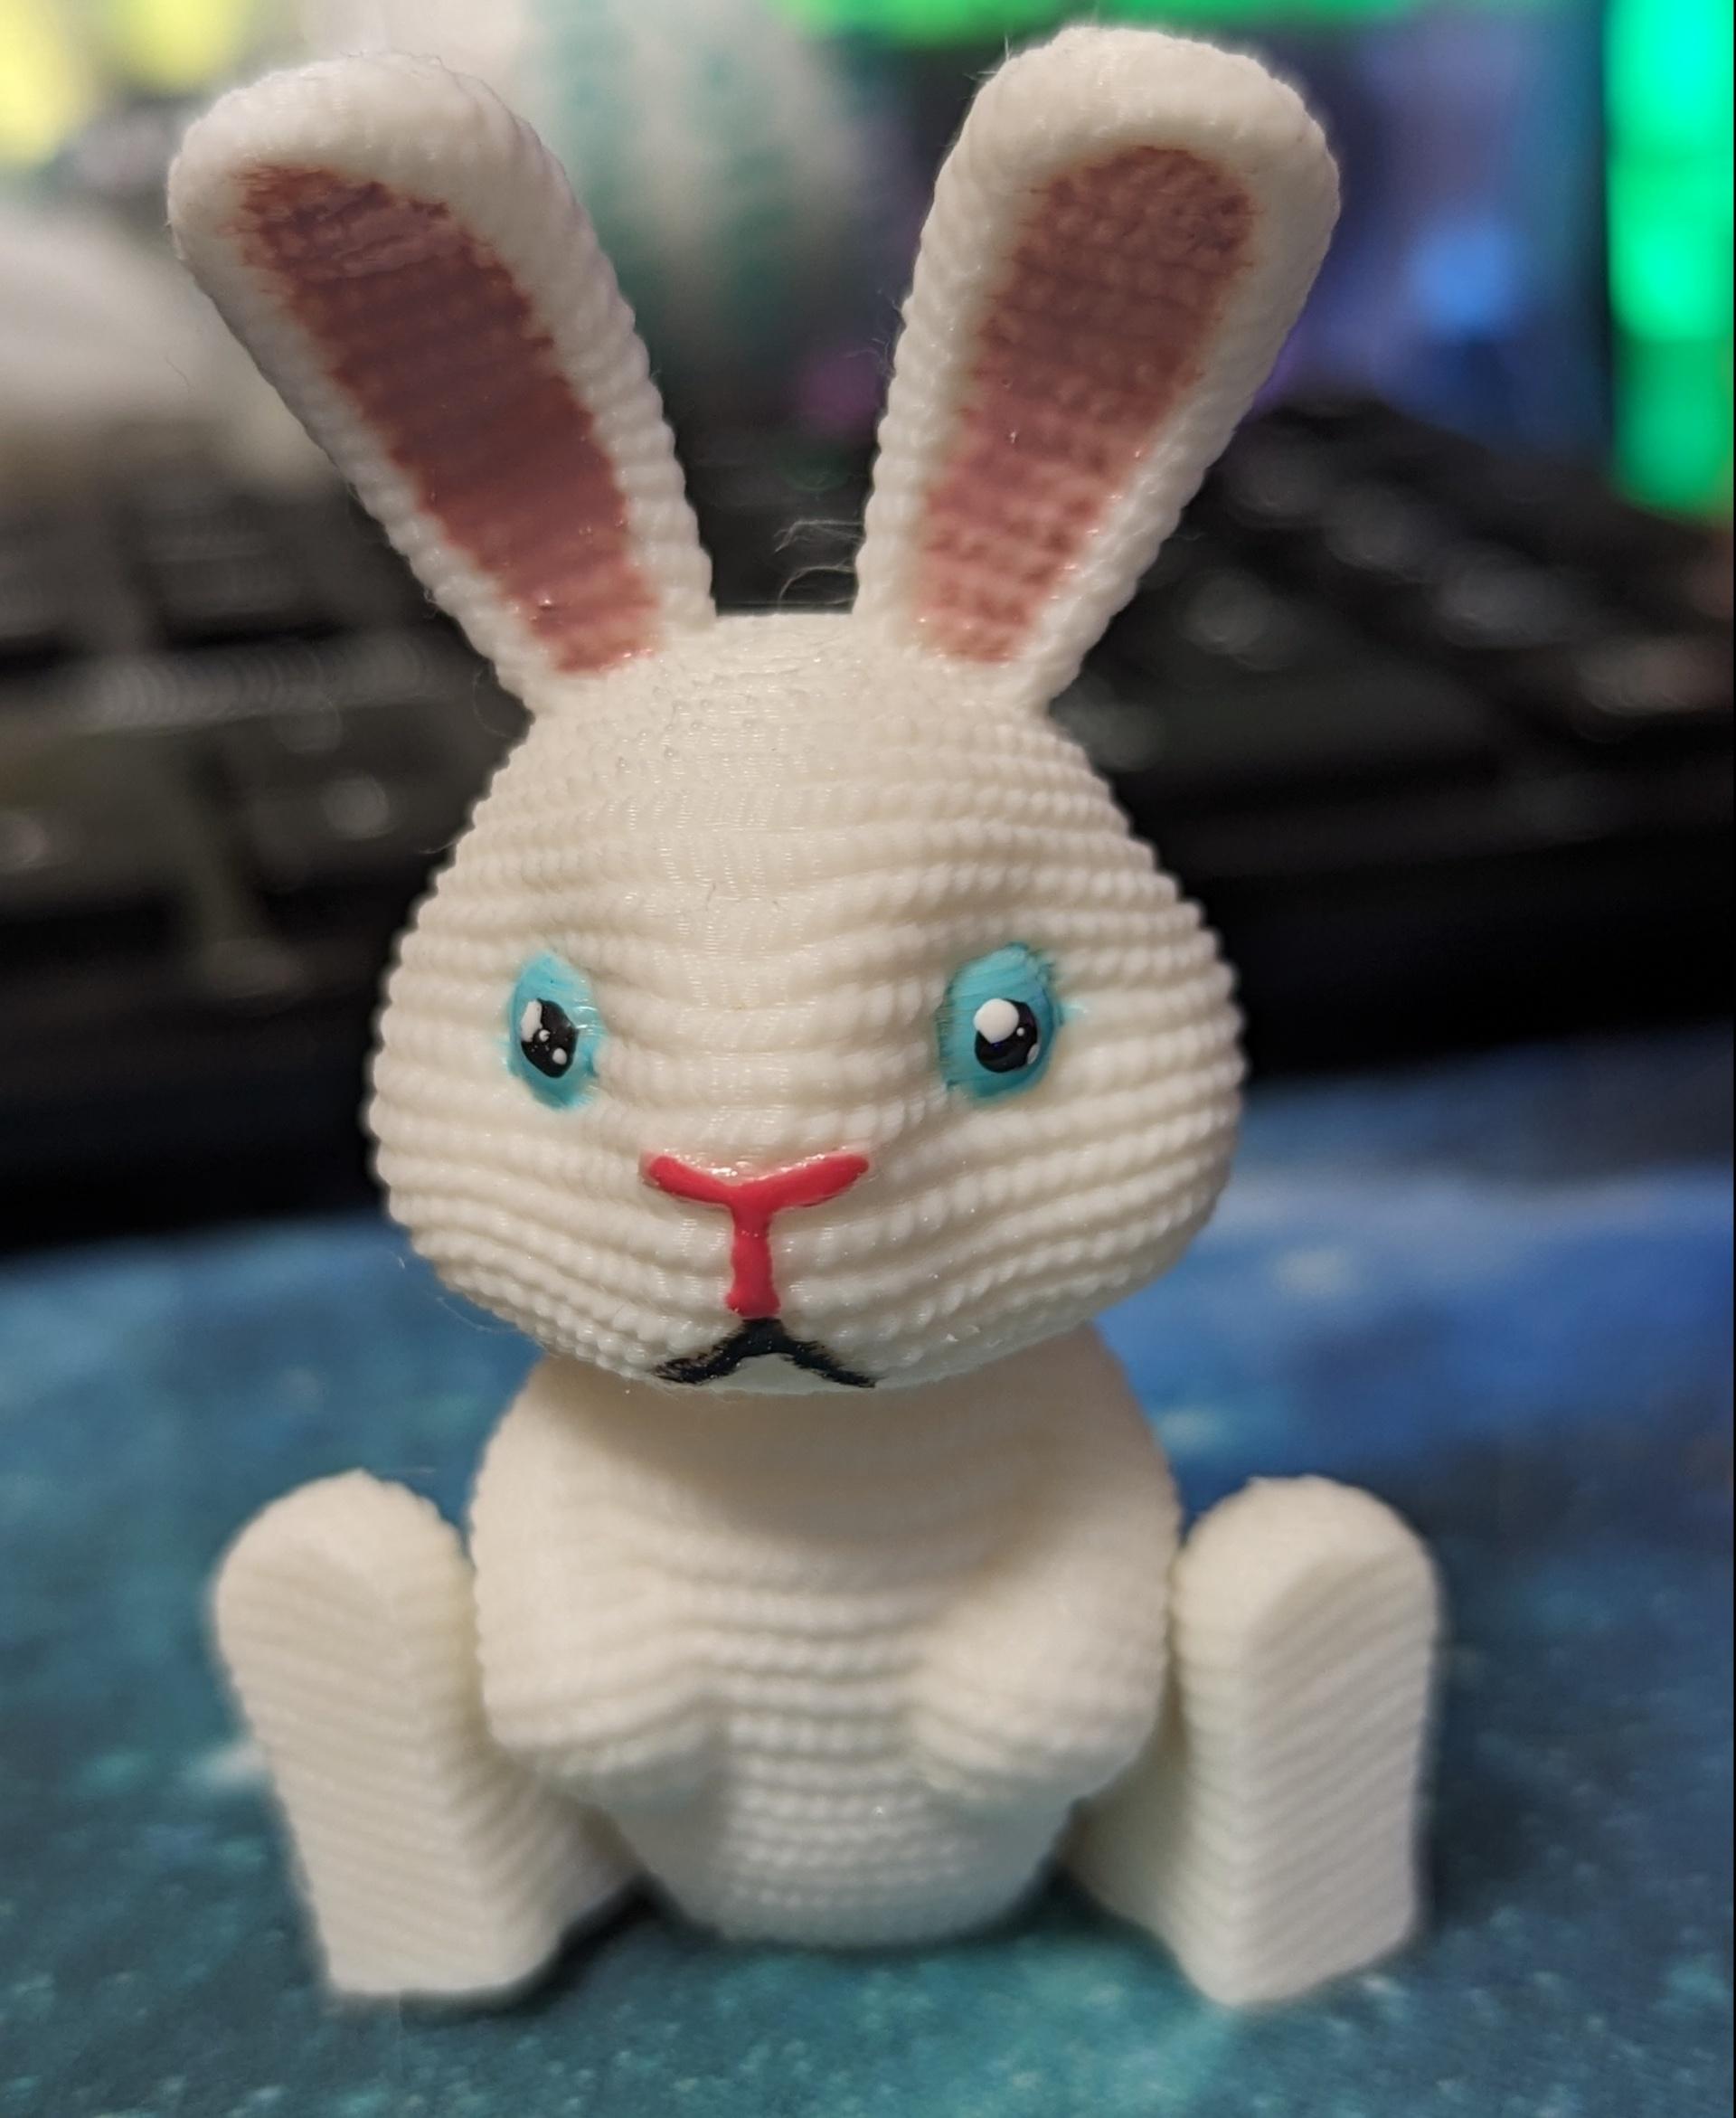 Flexi Crochet Bunny - I painted this guy with gel nail polish cured under an LED. Printed on my Ender 3 V2 Neo, with white Ziro PLA filament, at 50% size. He doesn't stand on his own two feet (balance issues, you know?), but he is cute so we'll forgive him. - 3d model